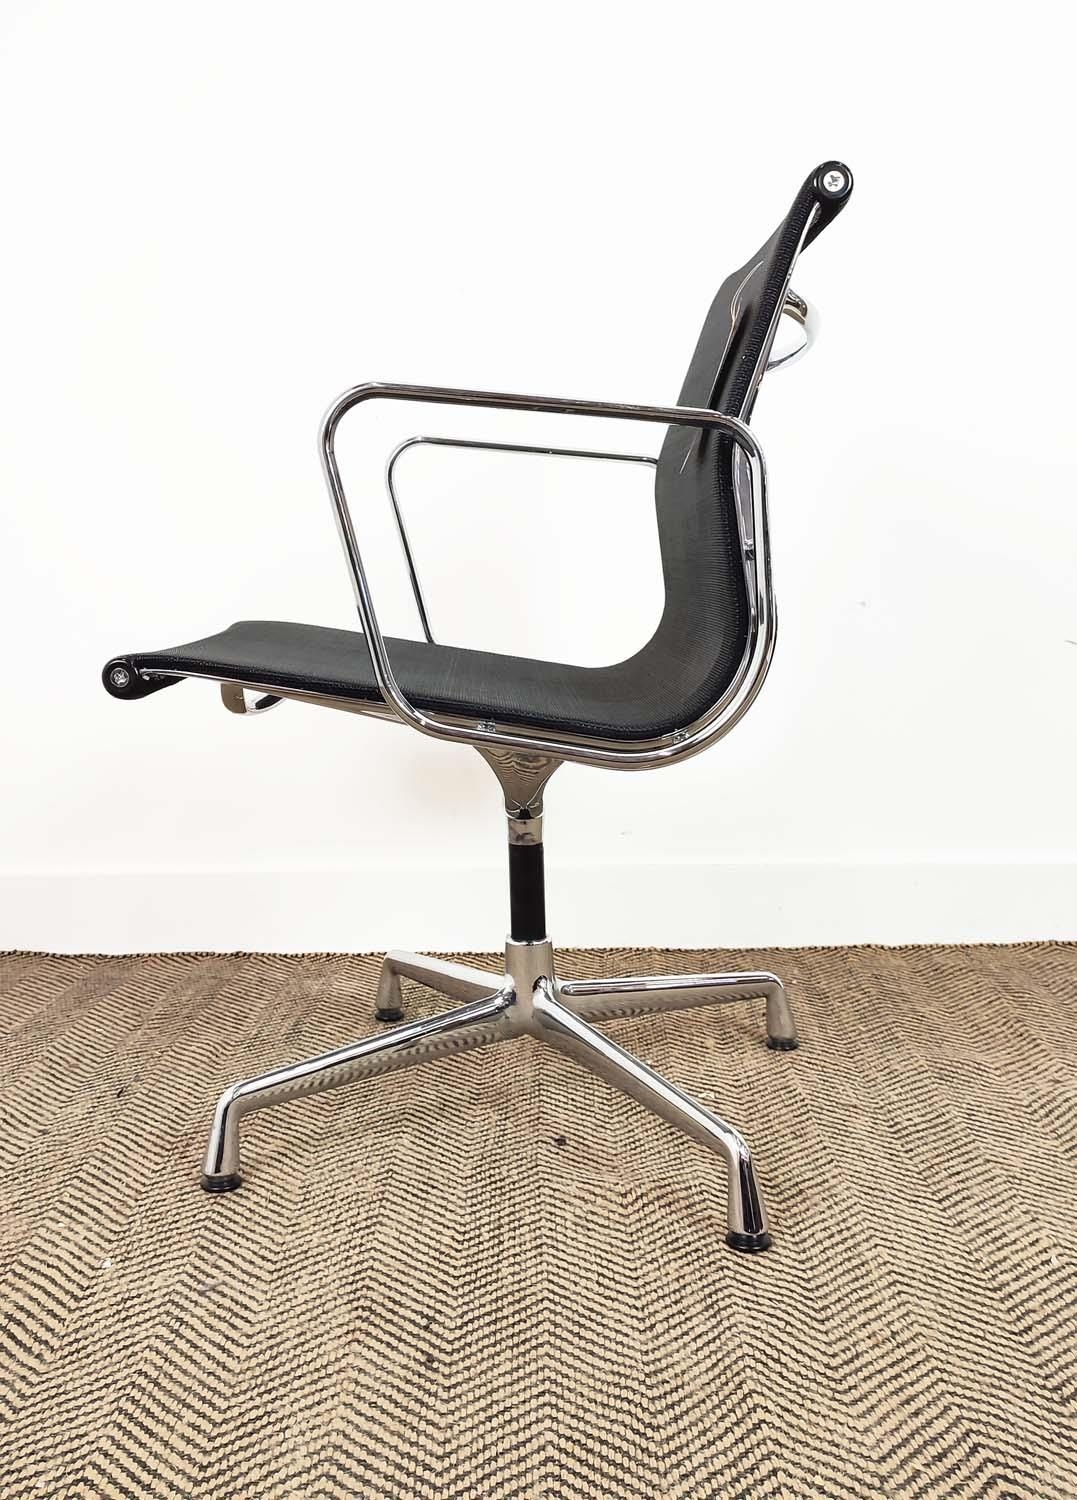 VITRA ALUMINIUM GROUP CHAIR, designed by Charles and Ray Eames, 57cm W x 85cm H, bears label. - Bild 5 aus 6